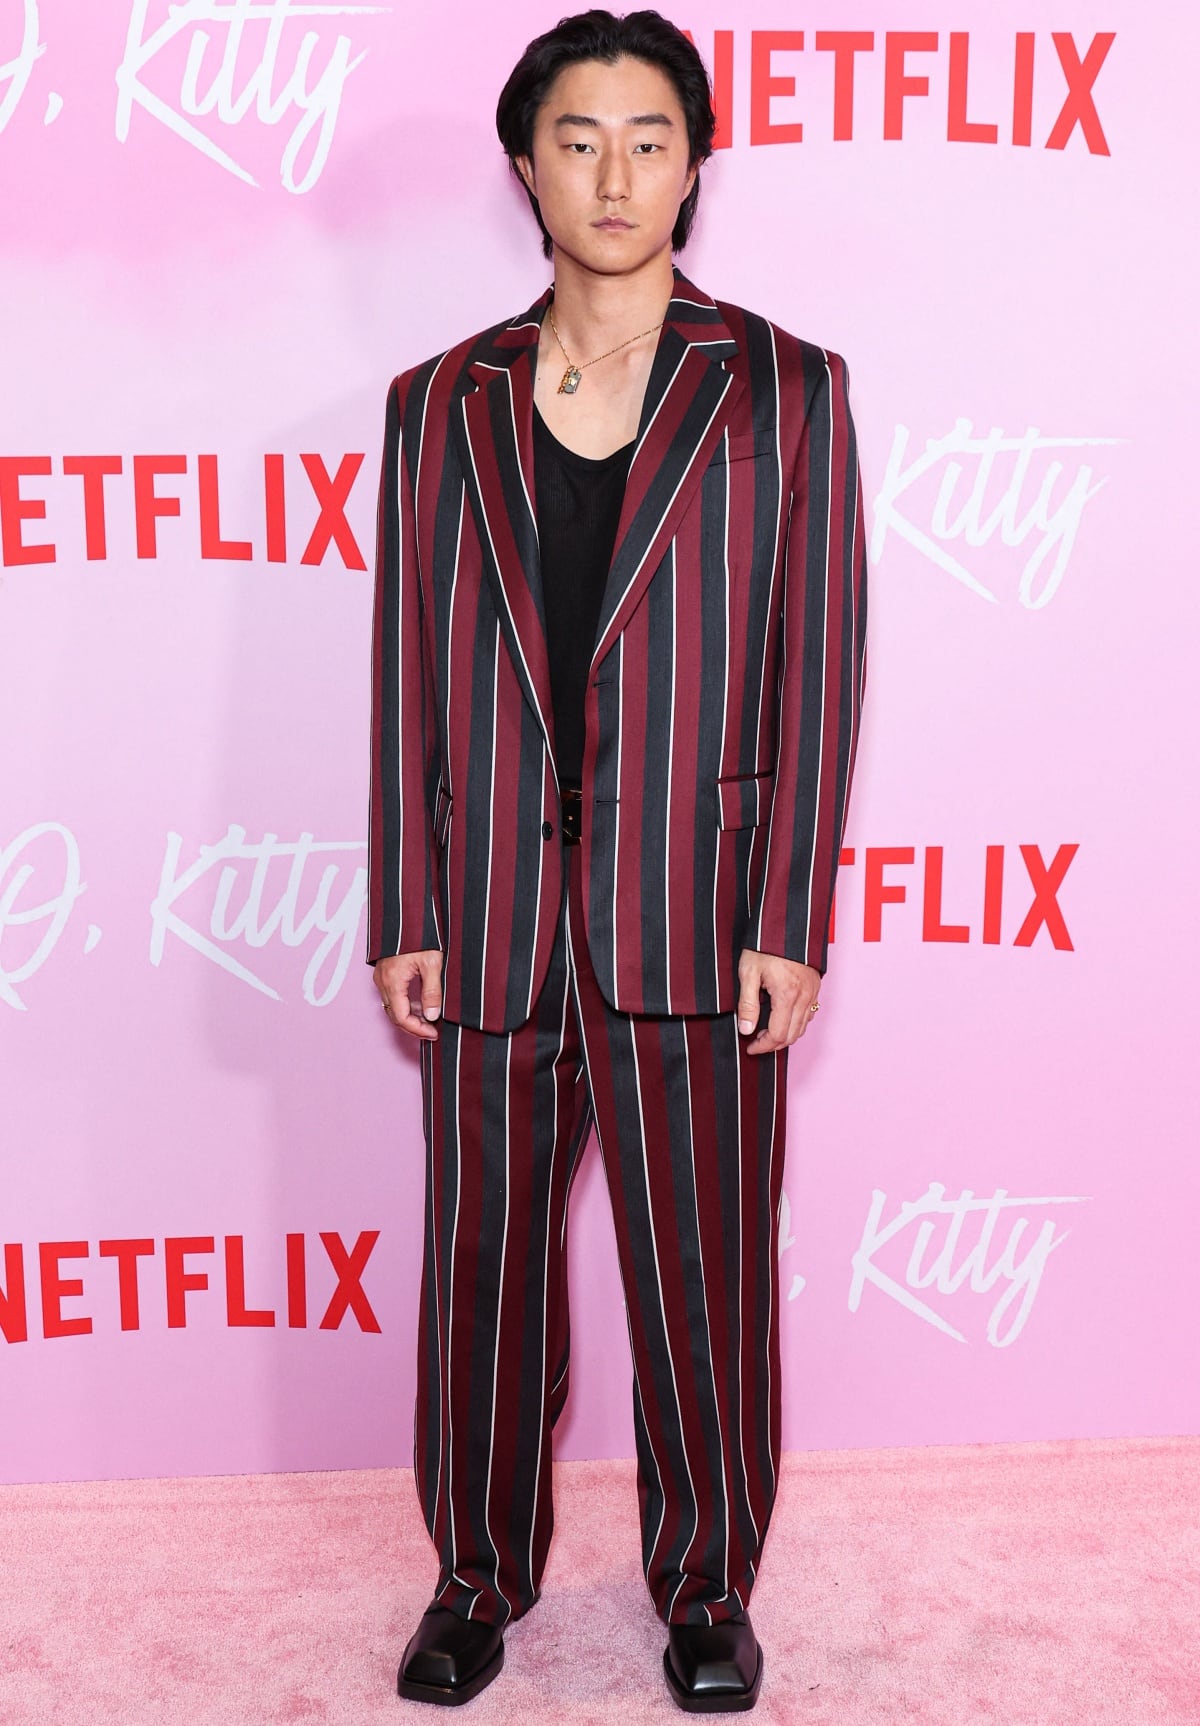 Peter Thurnwald wearing a striped suit and black dress shoes at the Los Angeles premiere event of Netflix’s XO, Kitty Season 1